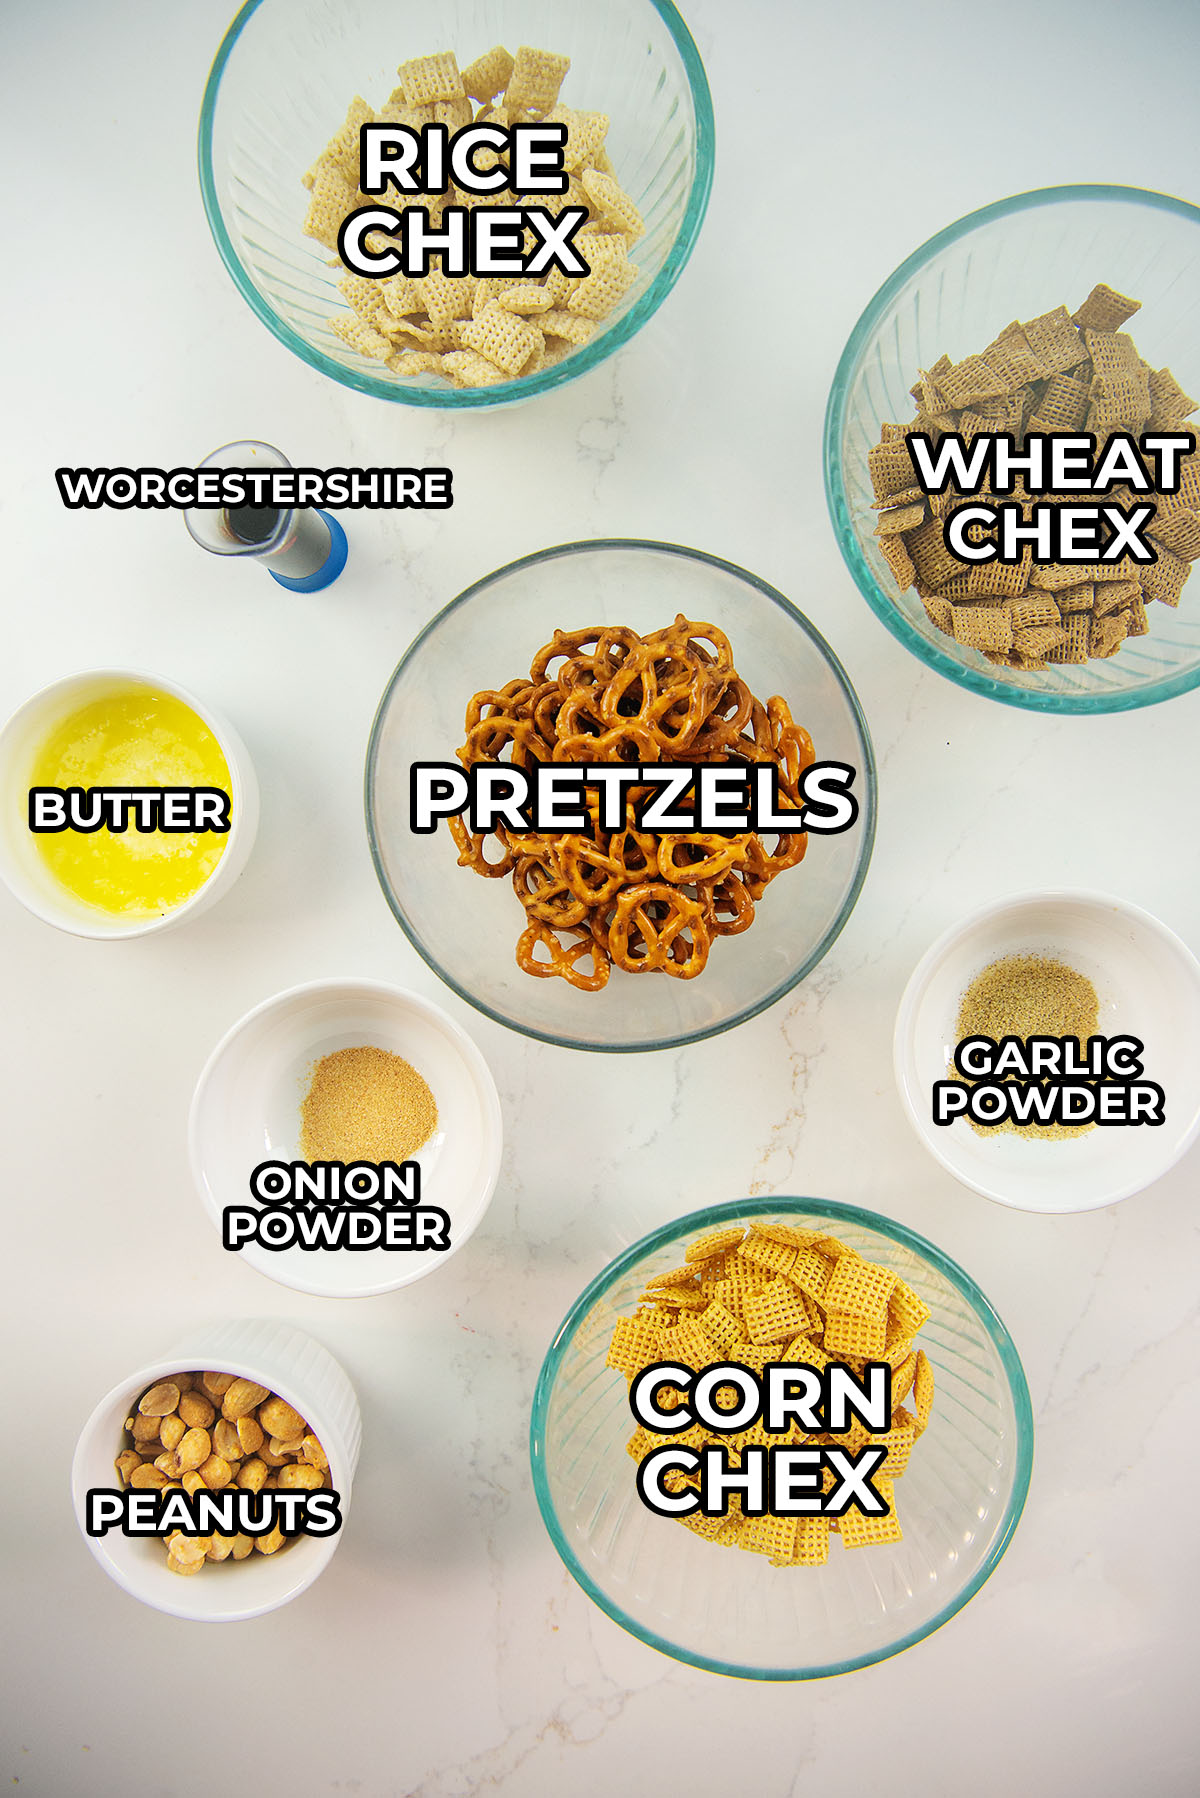 Chex mix ingredients spread out on a countertop.